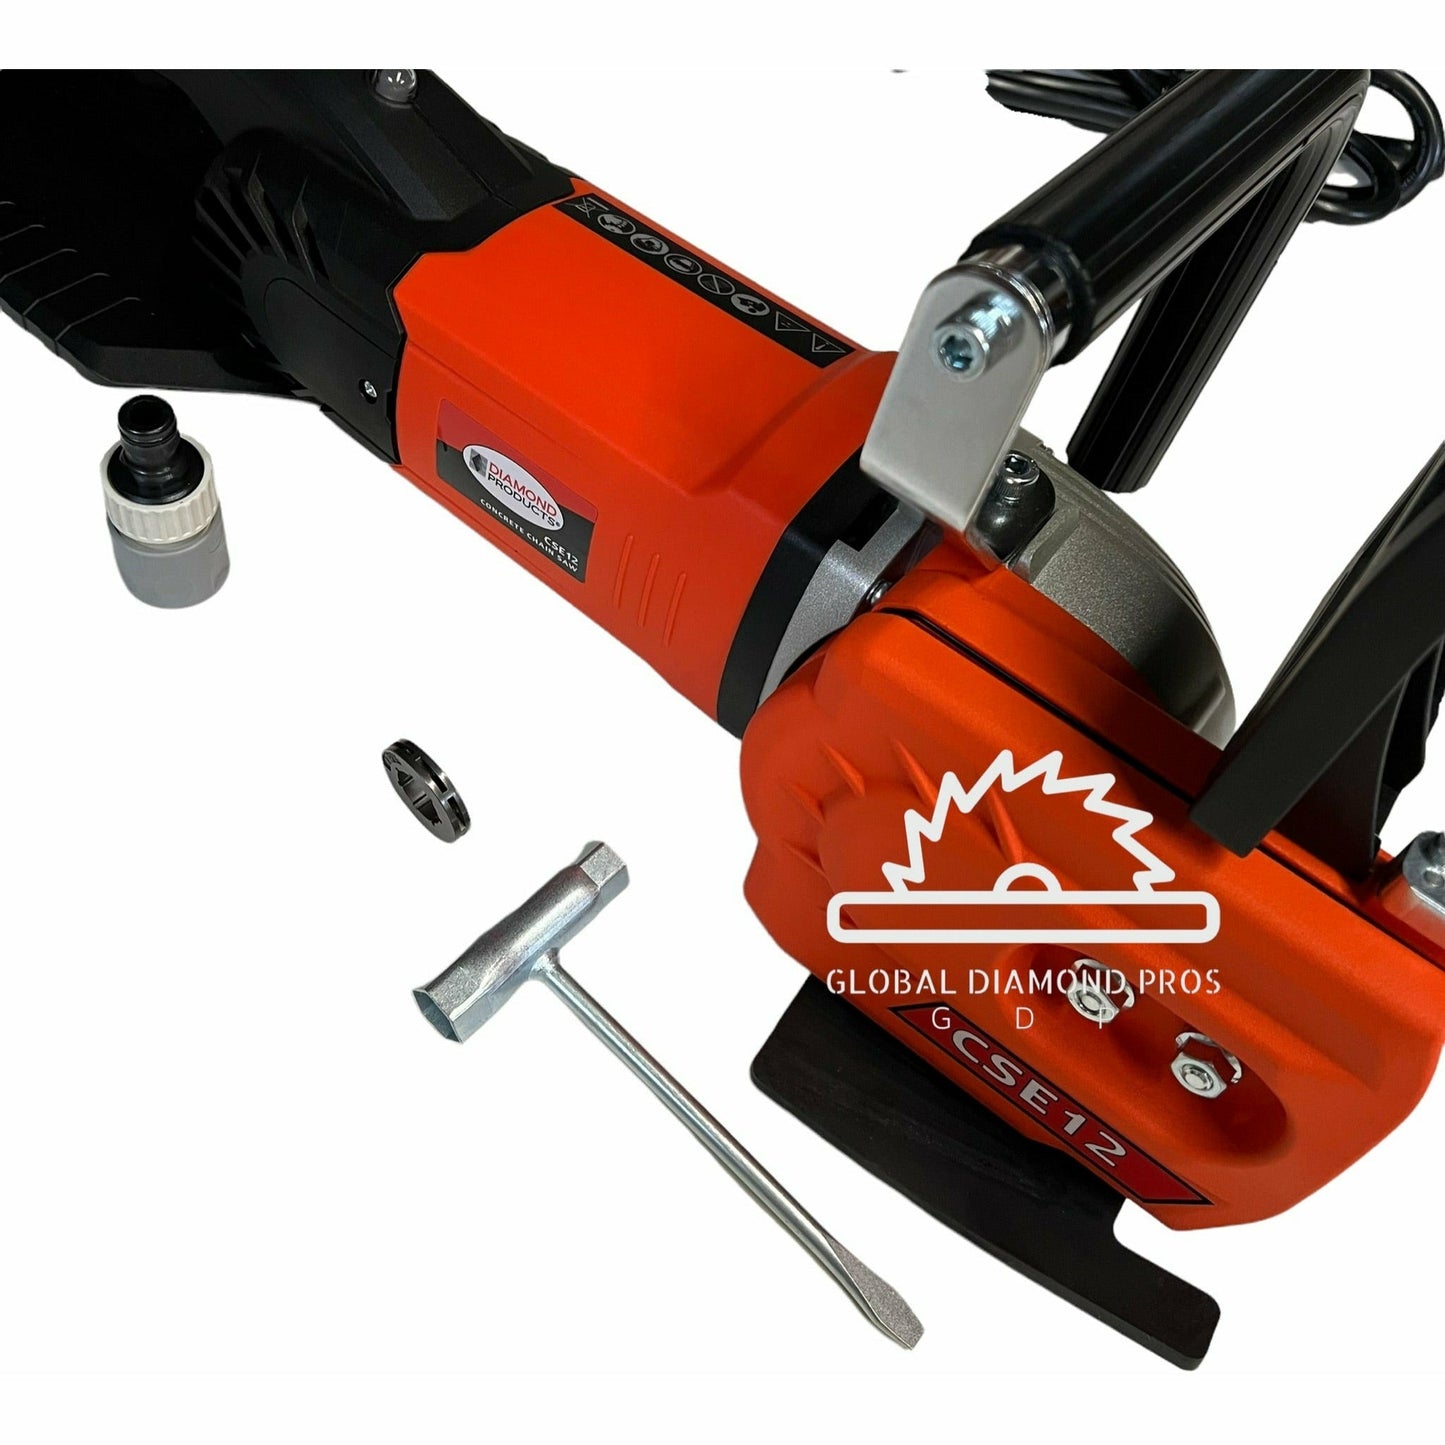 CSE12 Electric Concrete Chain Saw 230V Package - 12” Bar & Chain Included - 12" Cutting Depth Electric Chainsaw